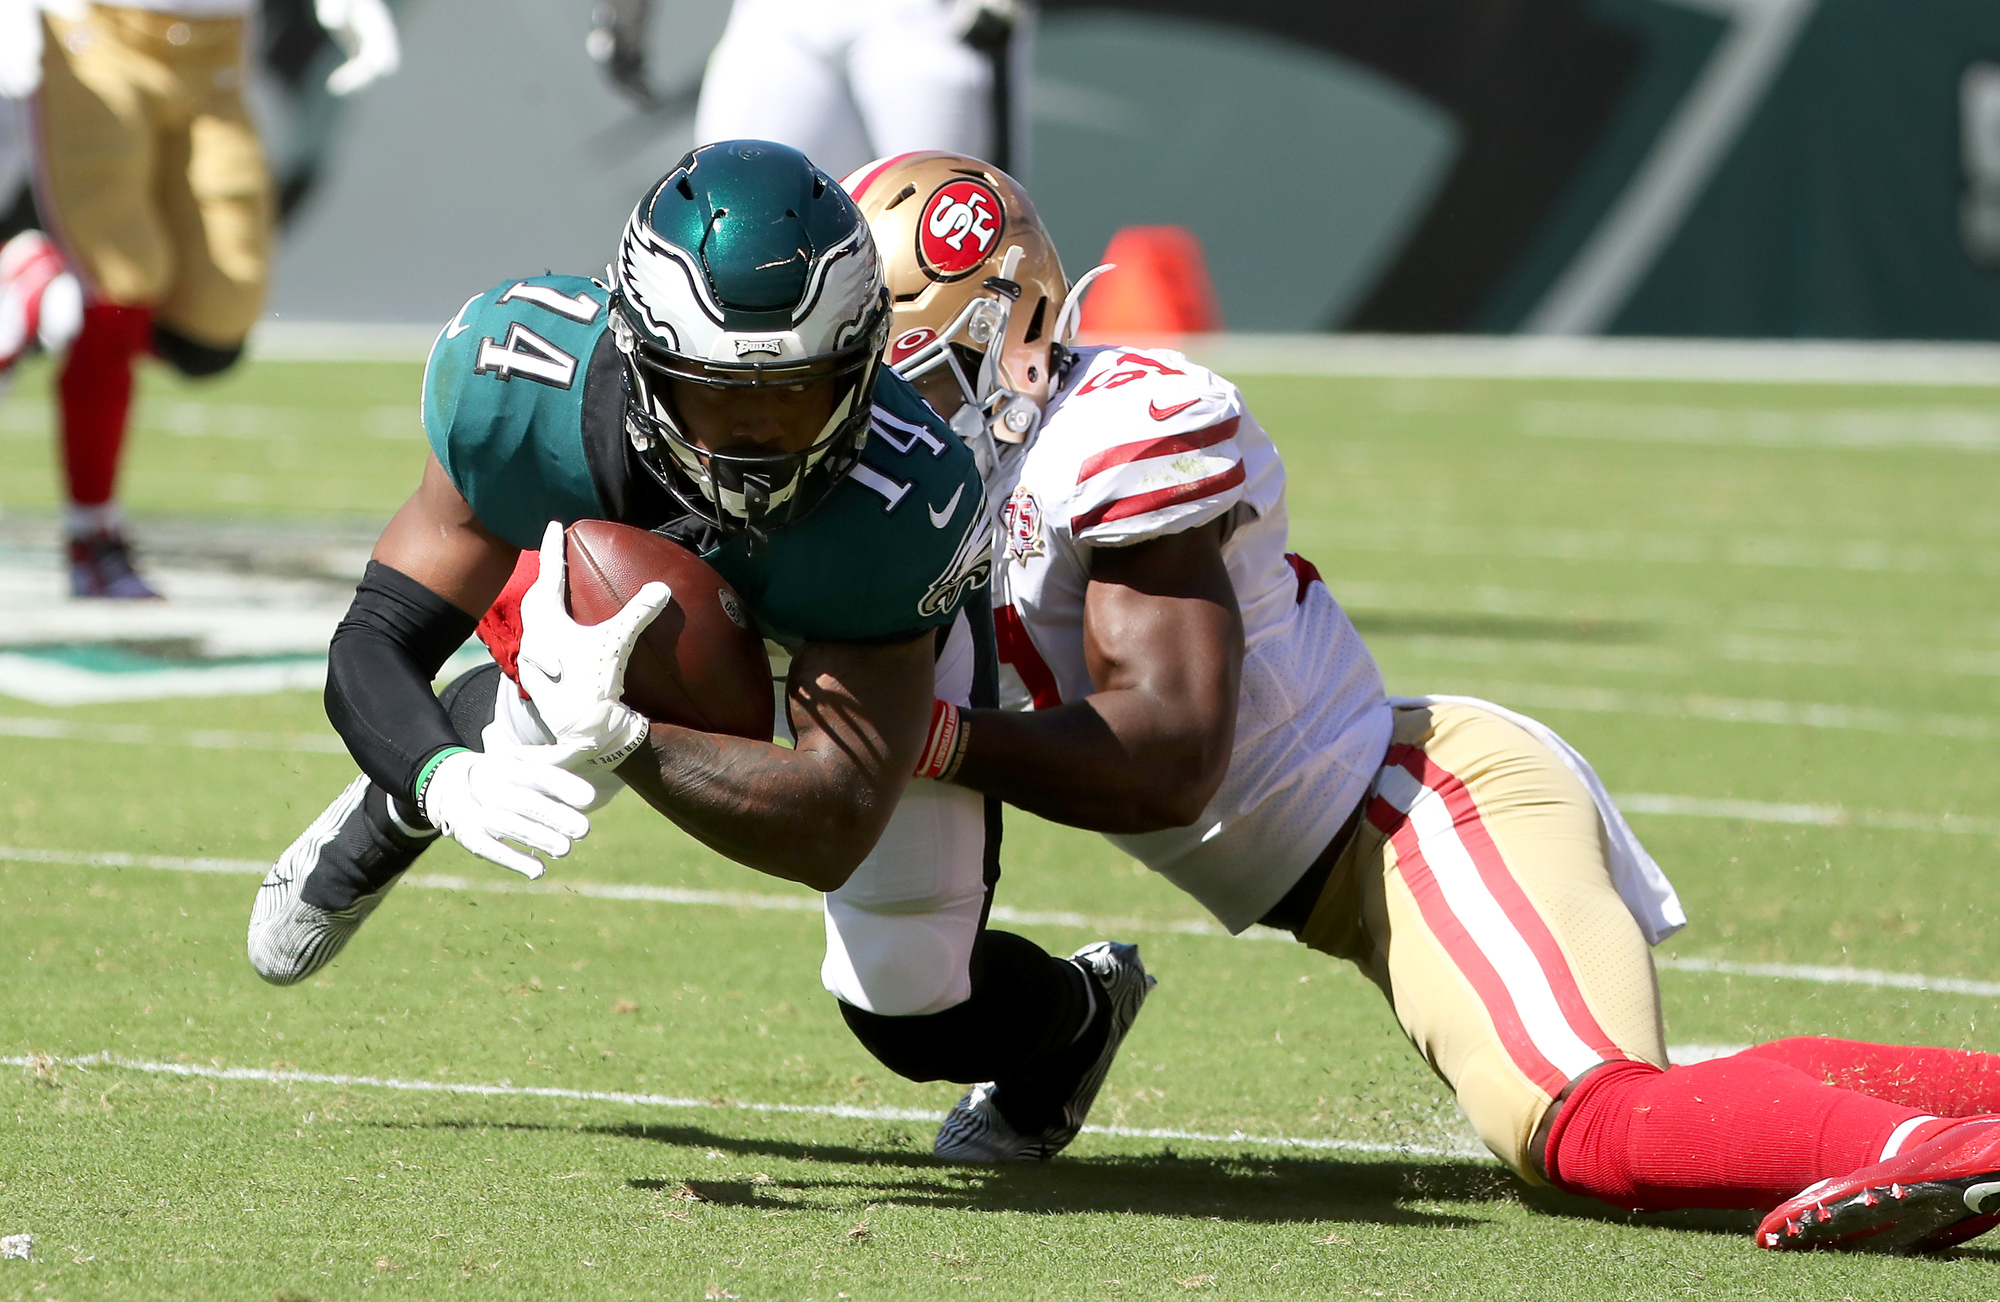 Eagles vs. 49ers predictions: Our beat writers make their picks